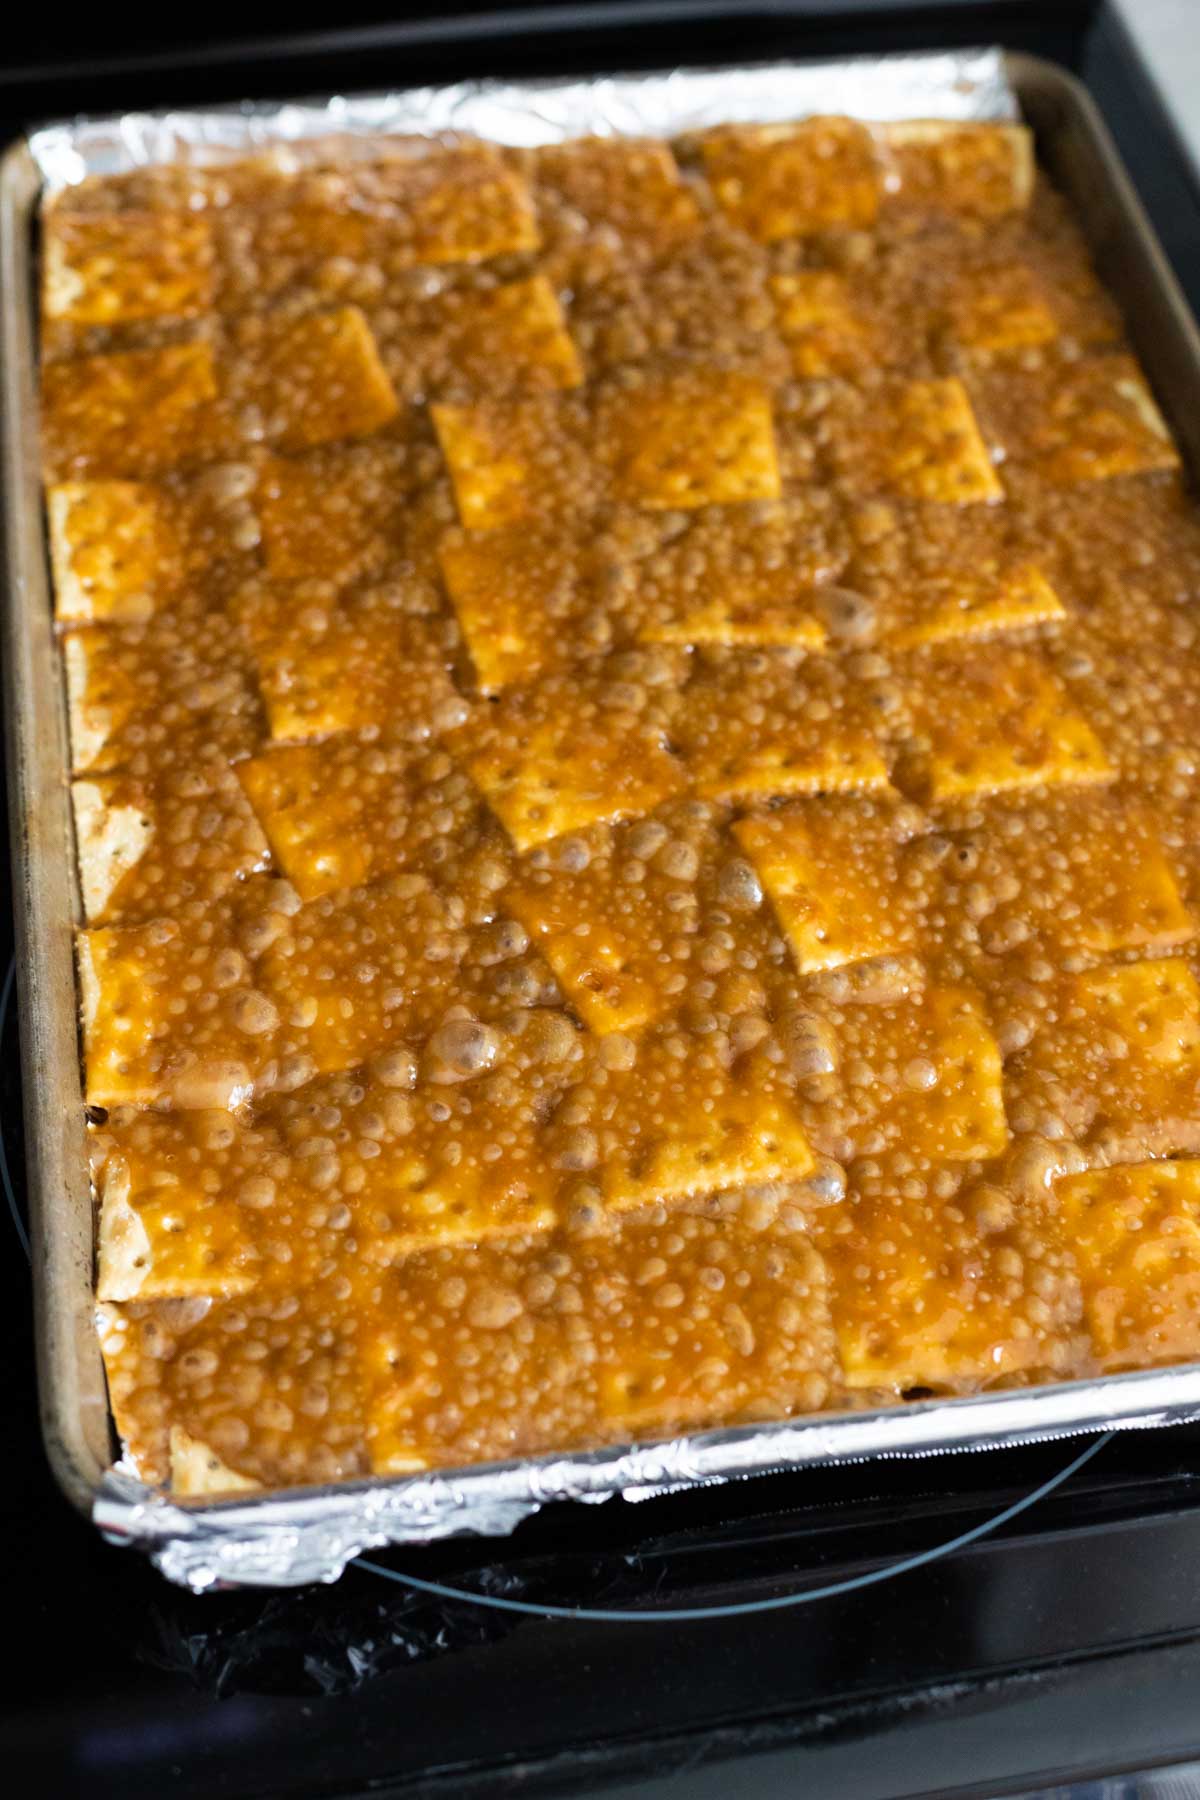 The pan of saltine crackers with toffee sauce have been baked and you can see the sugar has boiled up into bubbles.